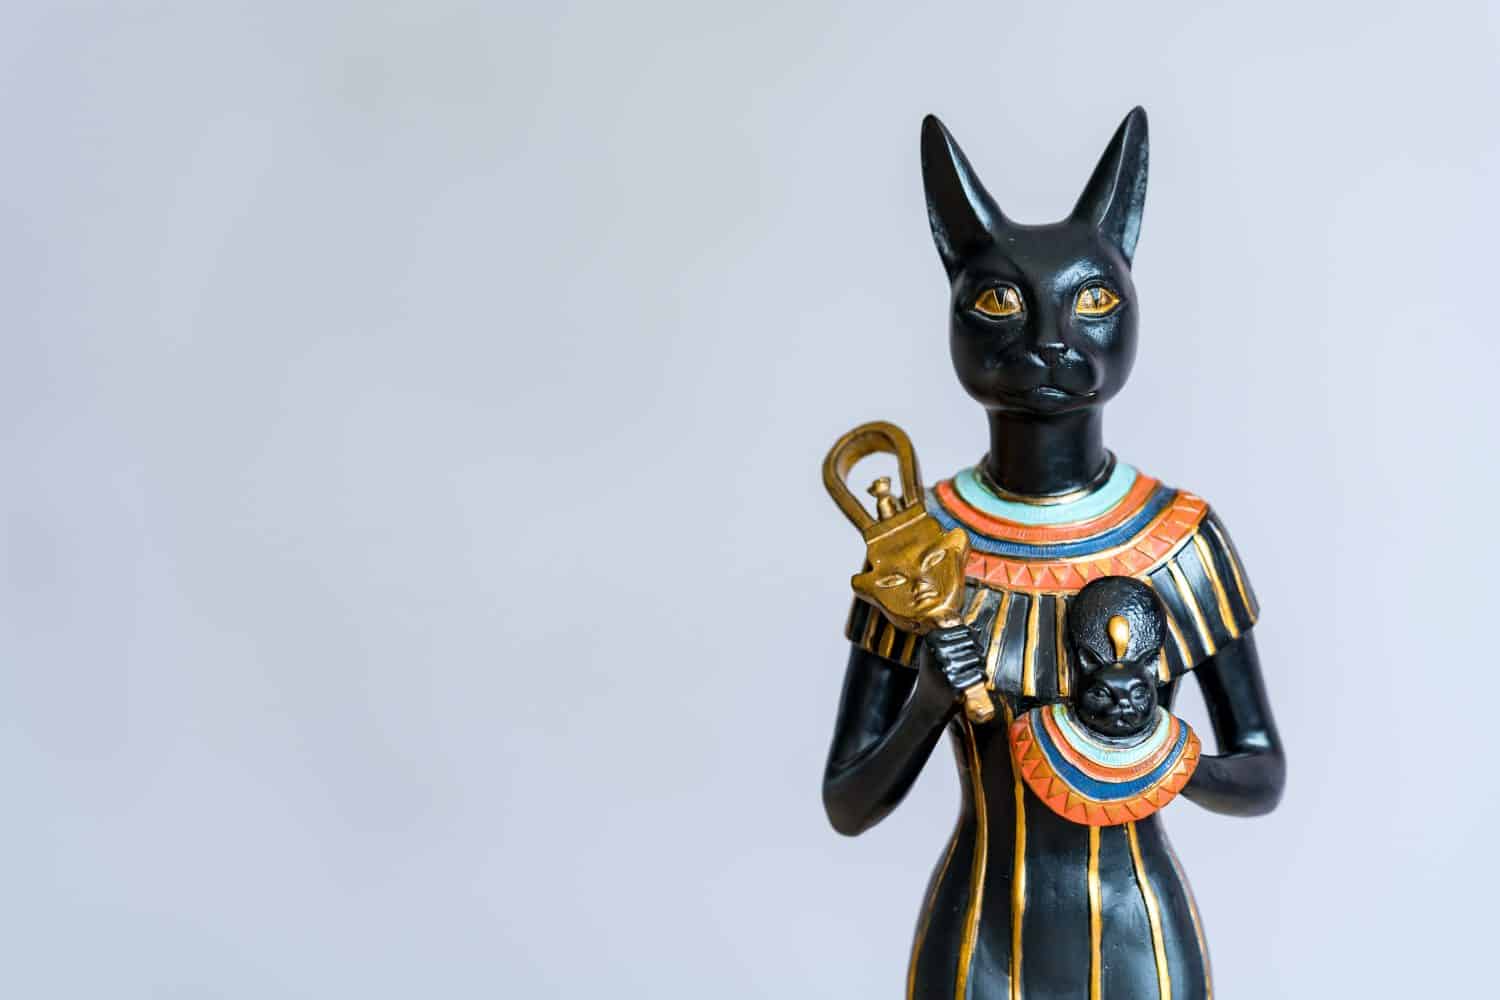 The Goddess Bastet - Role in ancient Egypt on gray background. Bastet was a goddess in ancient Egyptian religion. 